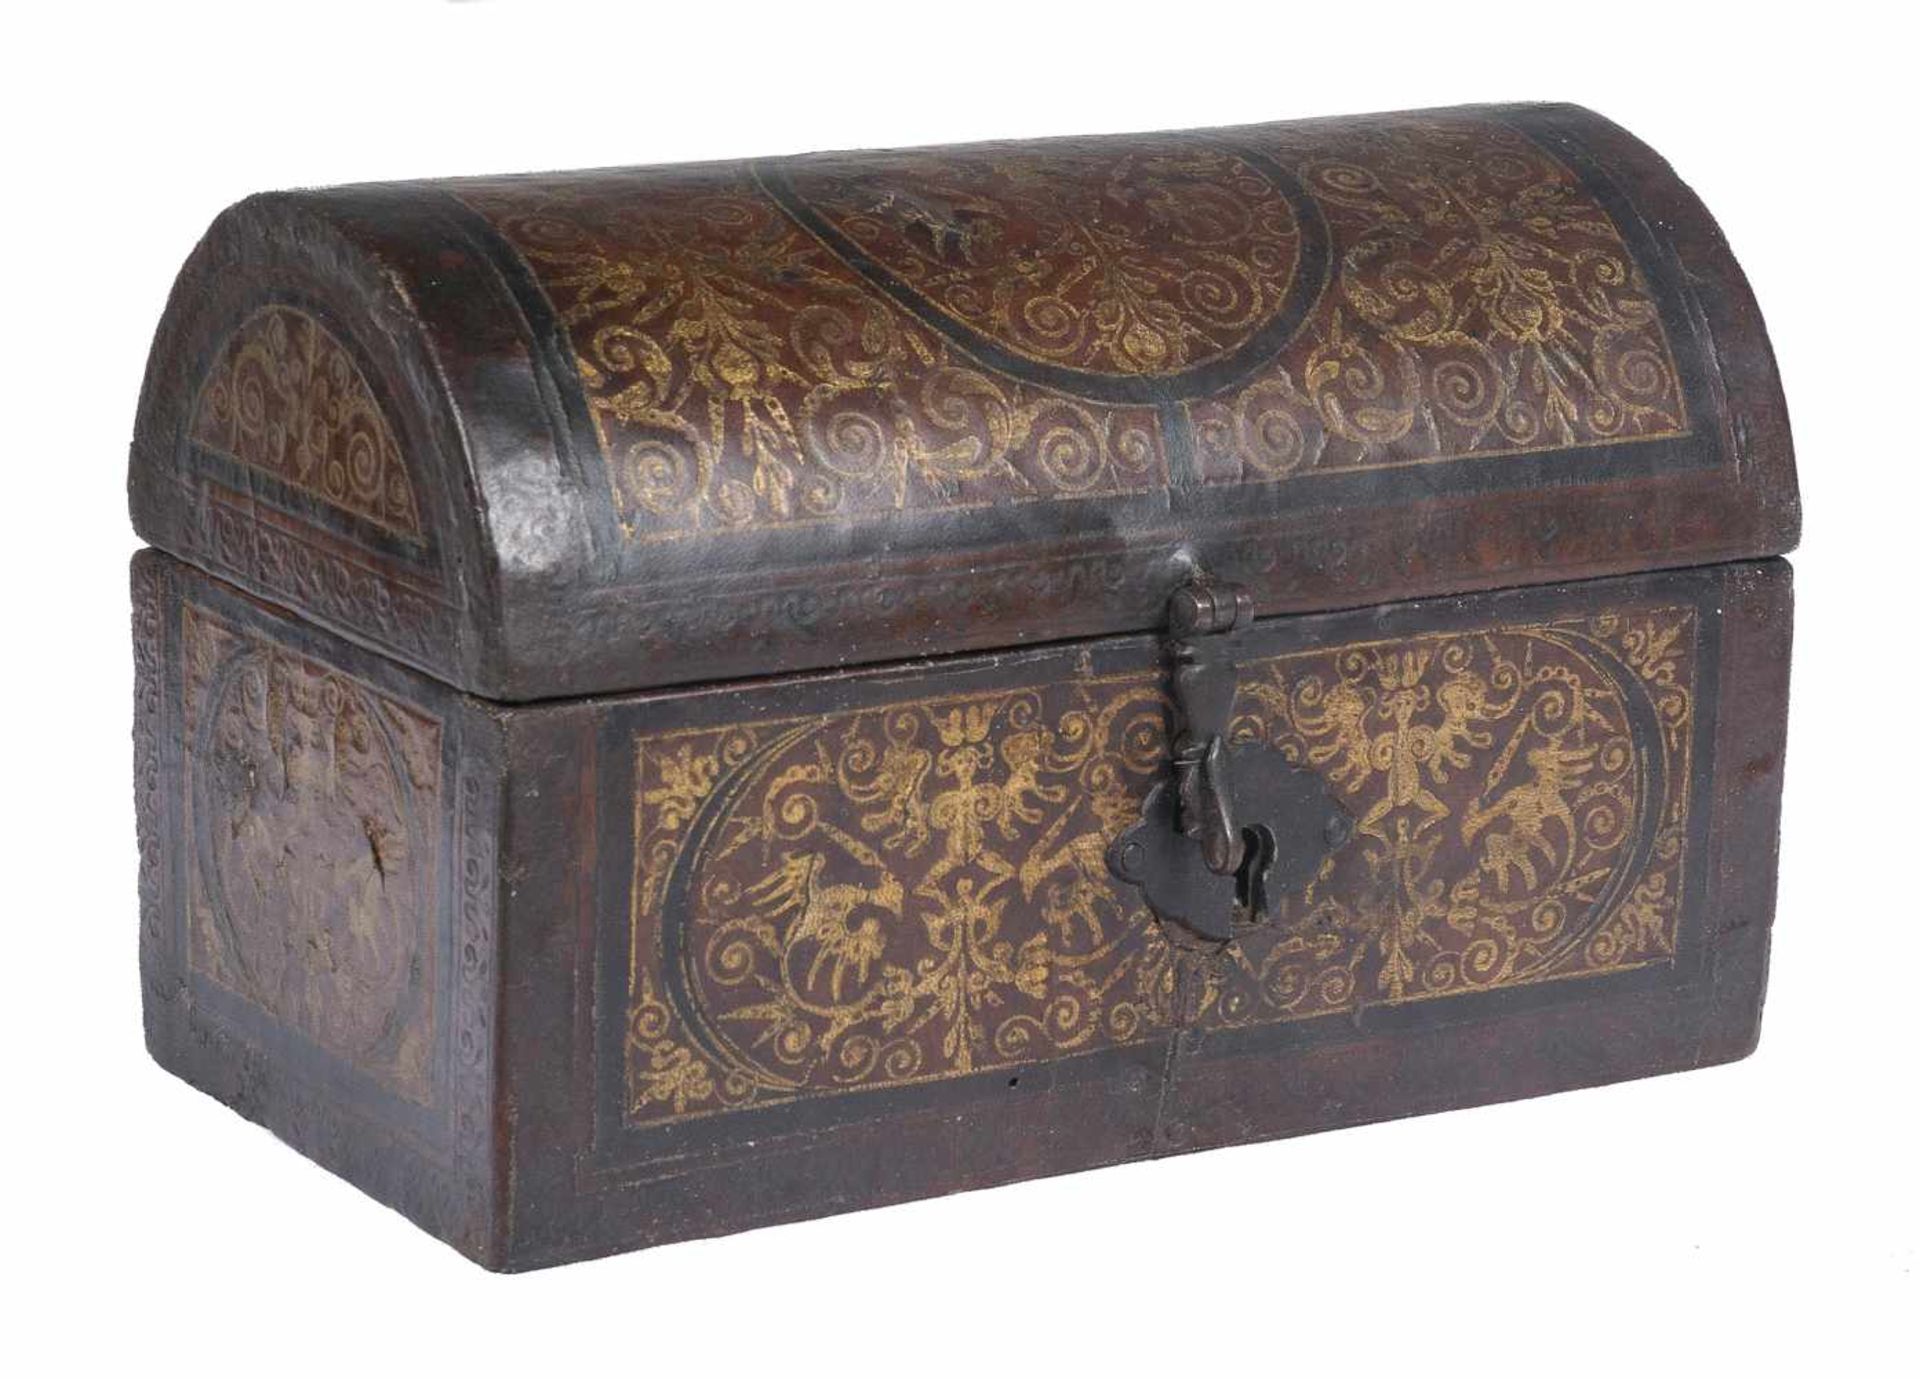 Wooden chest covered in leather with gold goffering and iron fittings. 17th century. The inside is